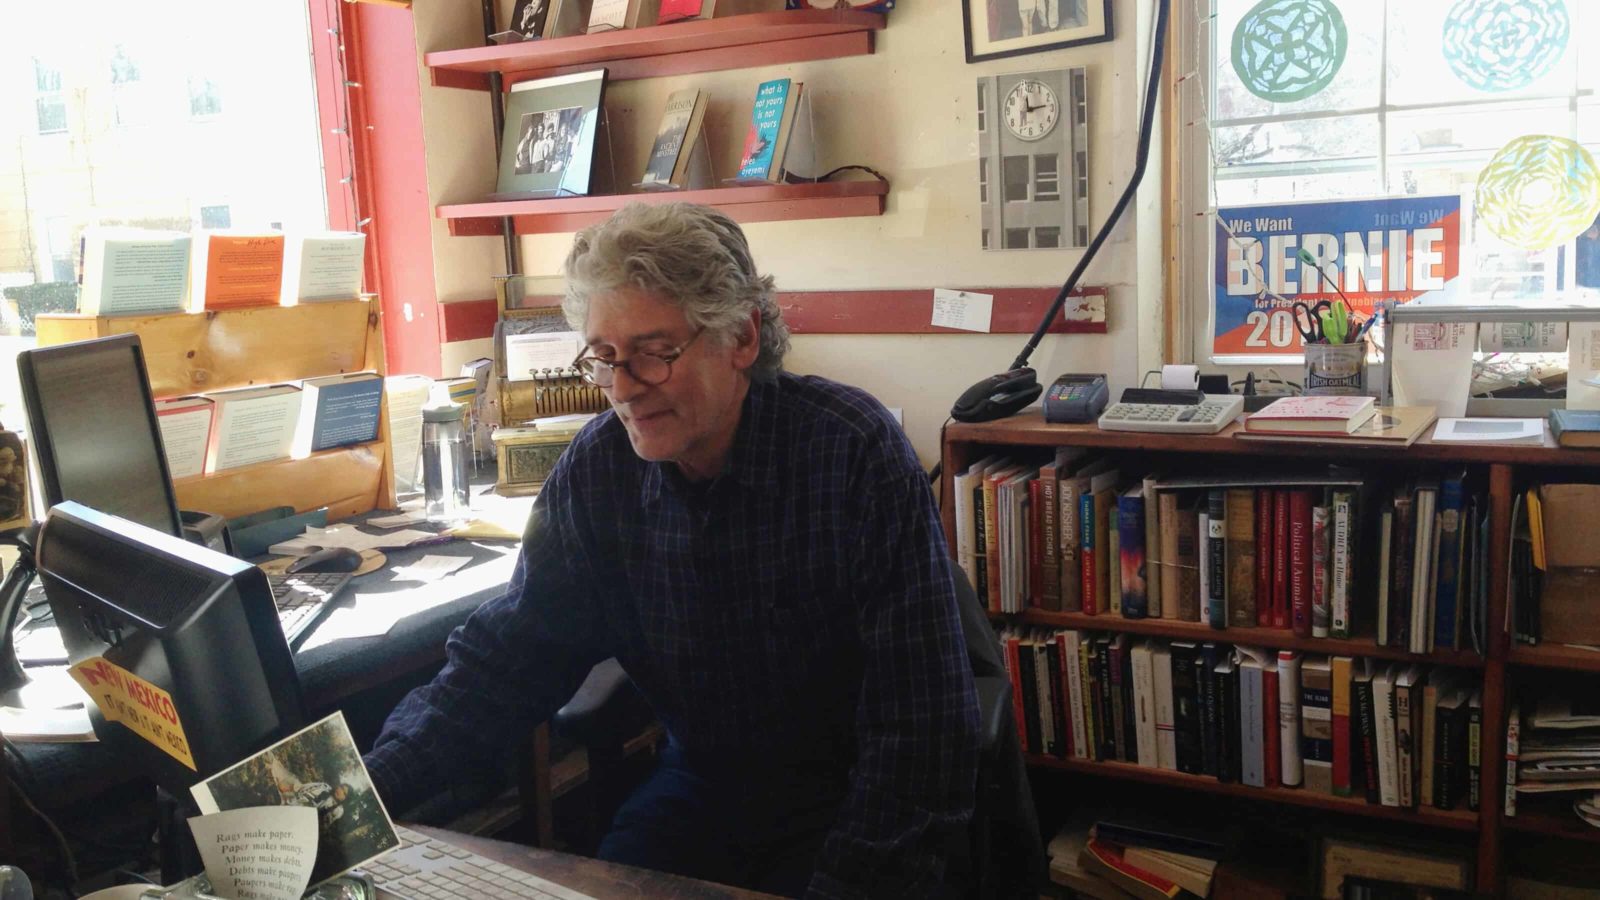 Matt Tannenbaum has run the local independent bookstore (The Bookstore) in Lenox for more than 40 years.